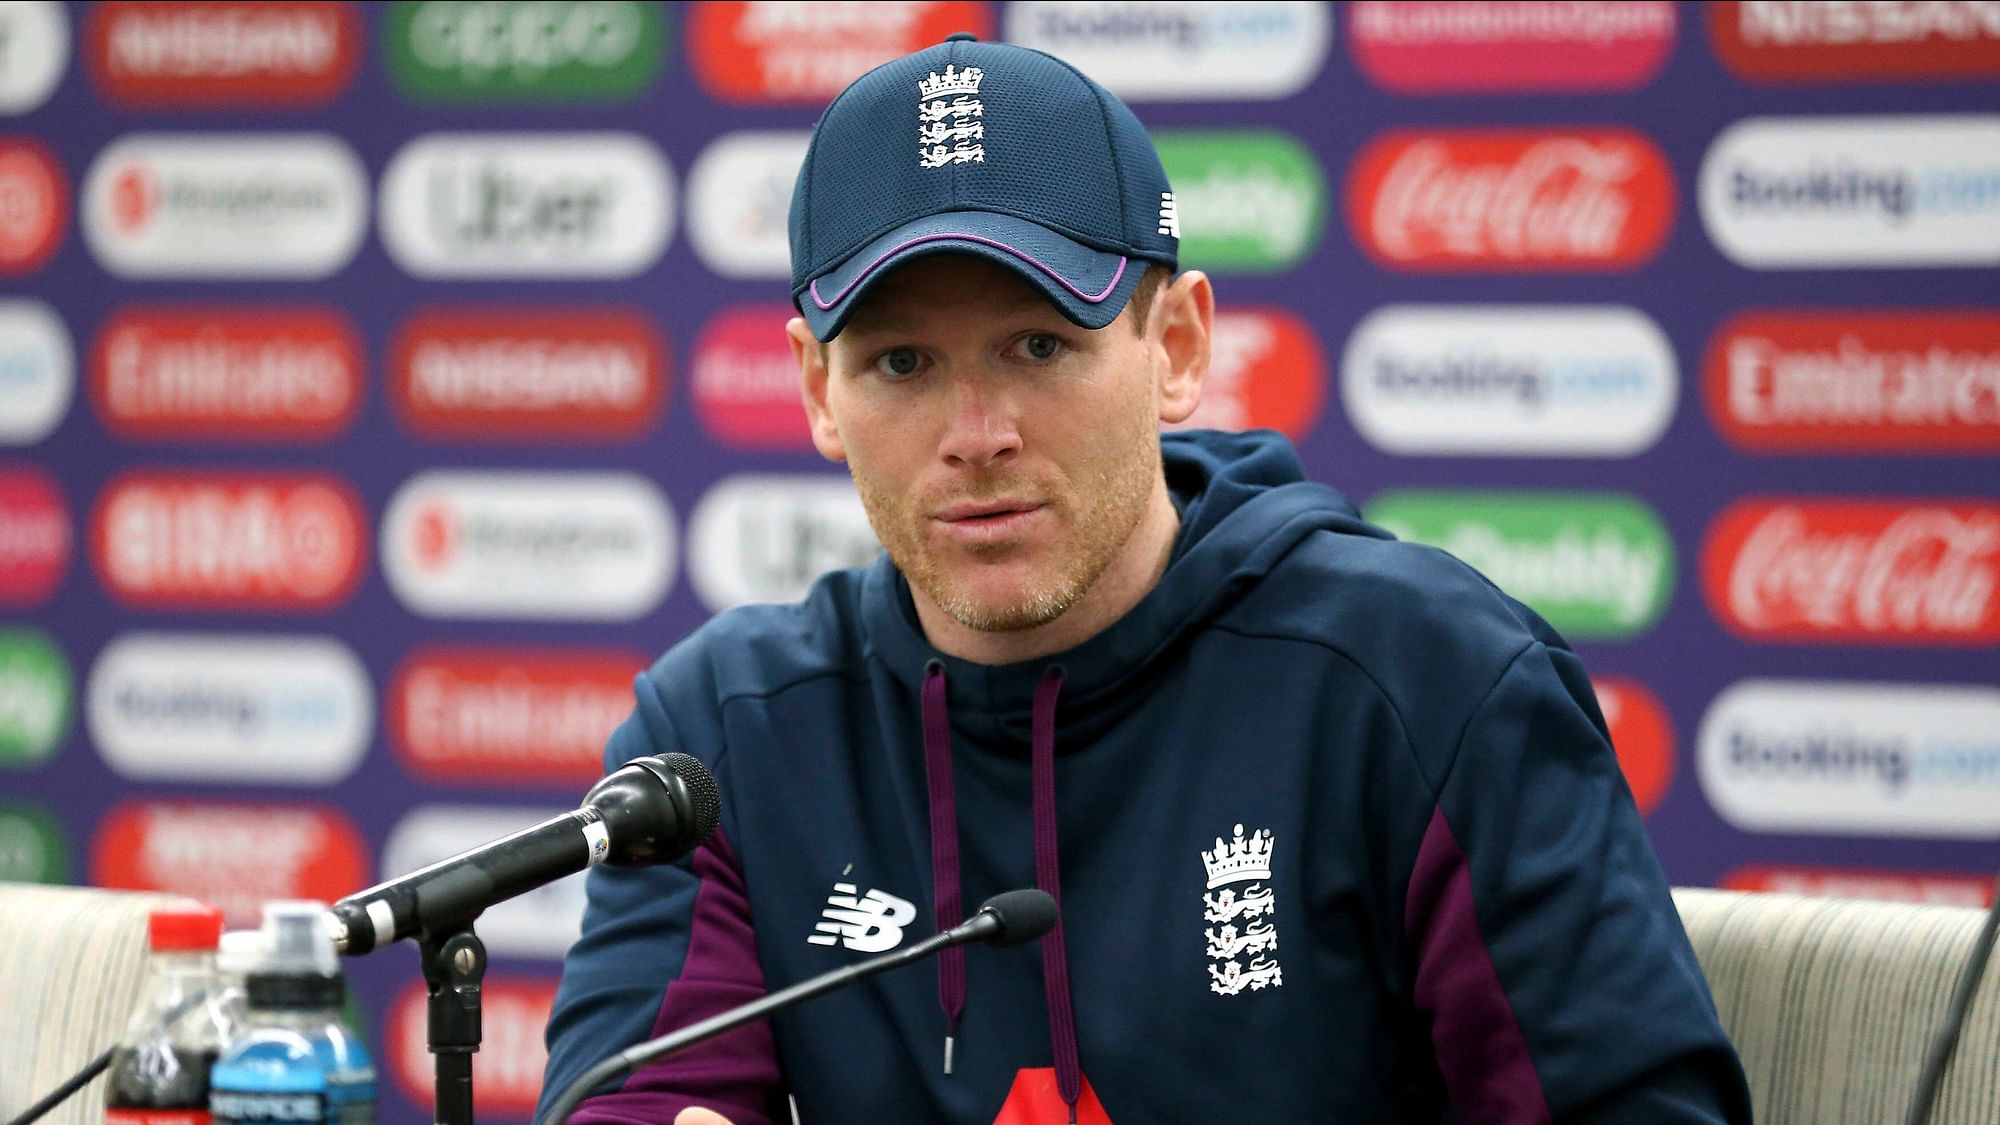 Eoin Morgan led England to their maiden World Cup title in 2019